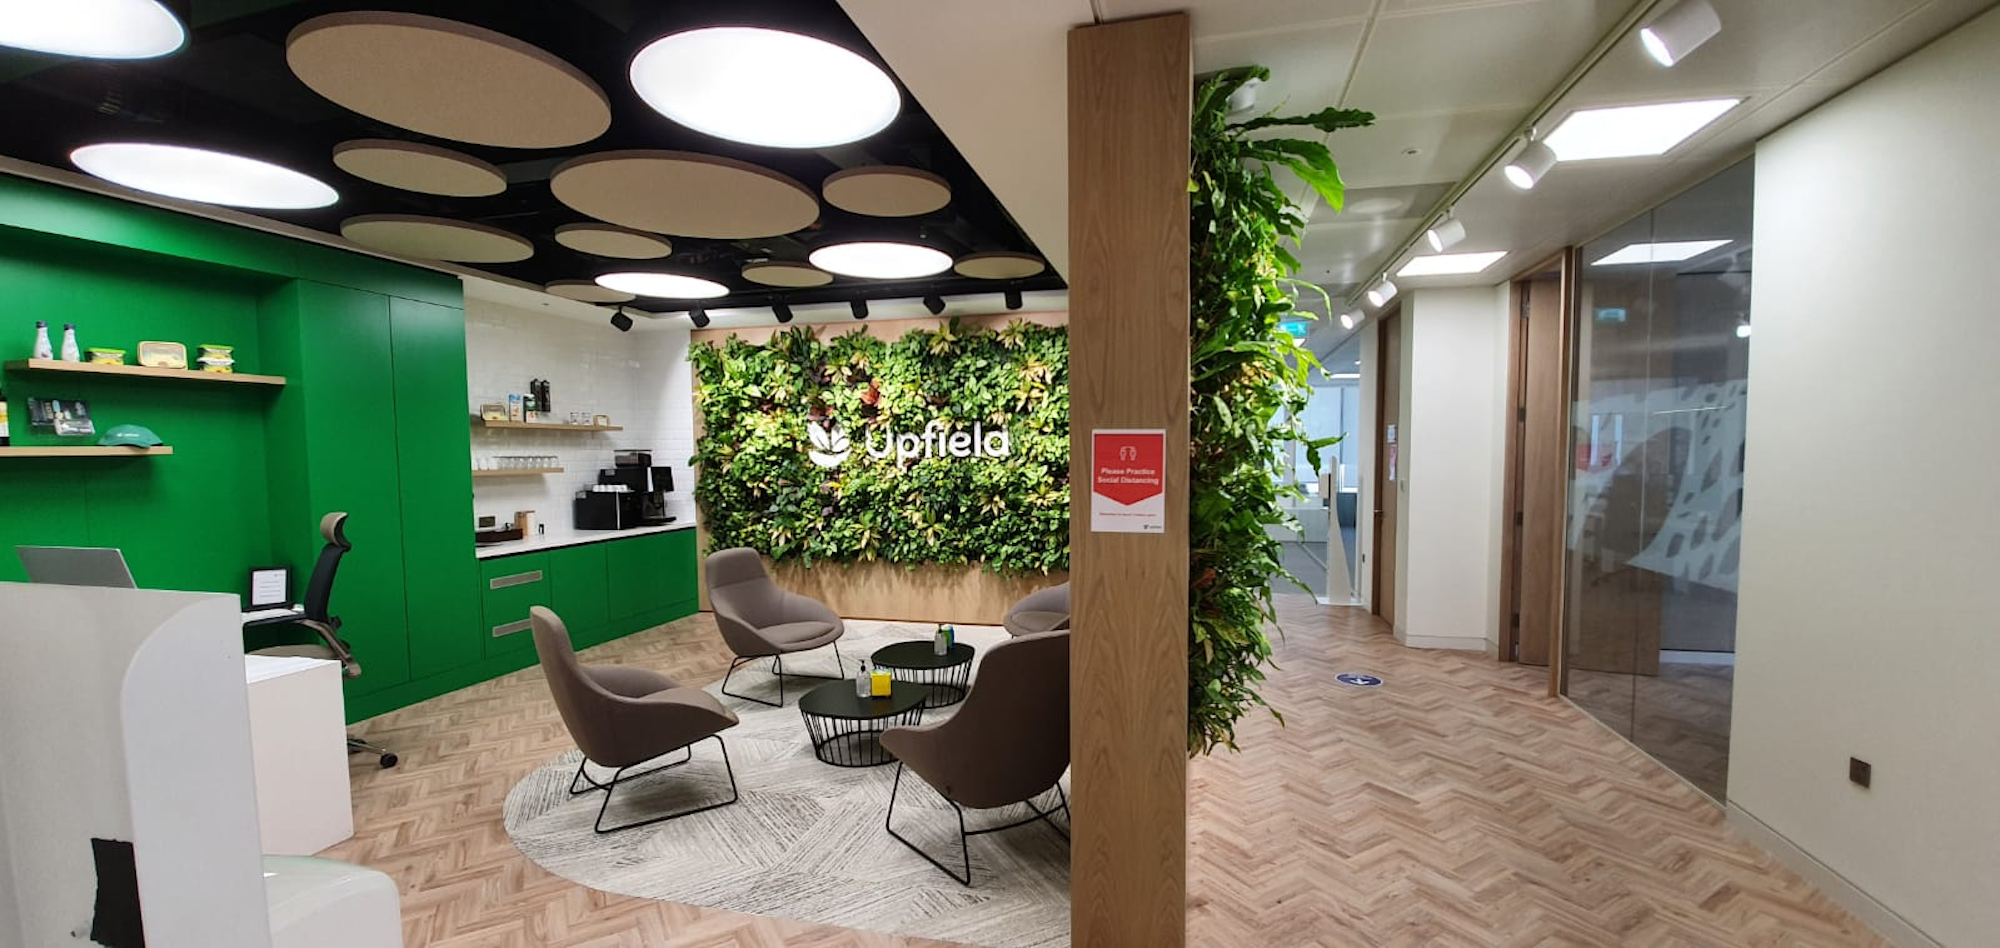 natural living green walls in an office space